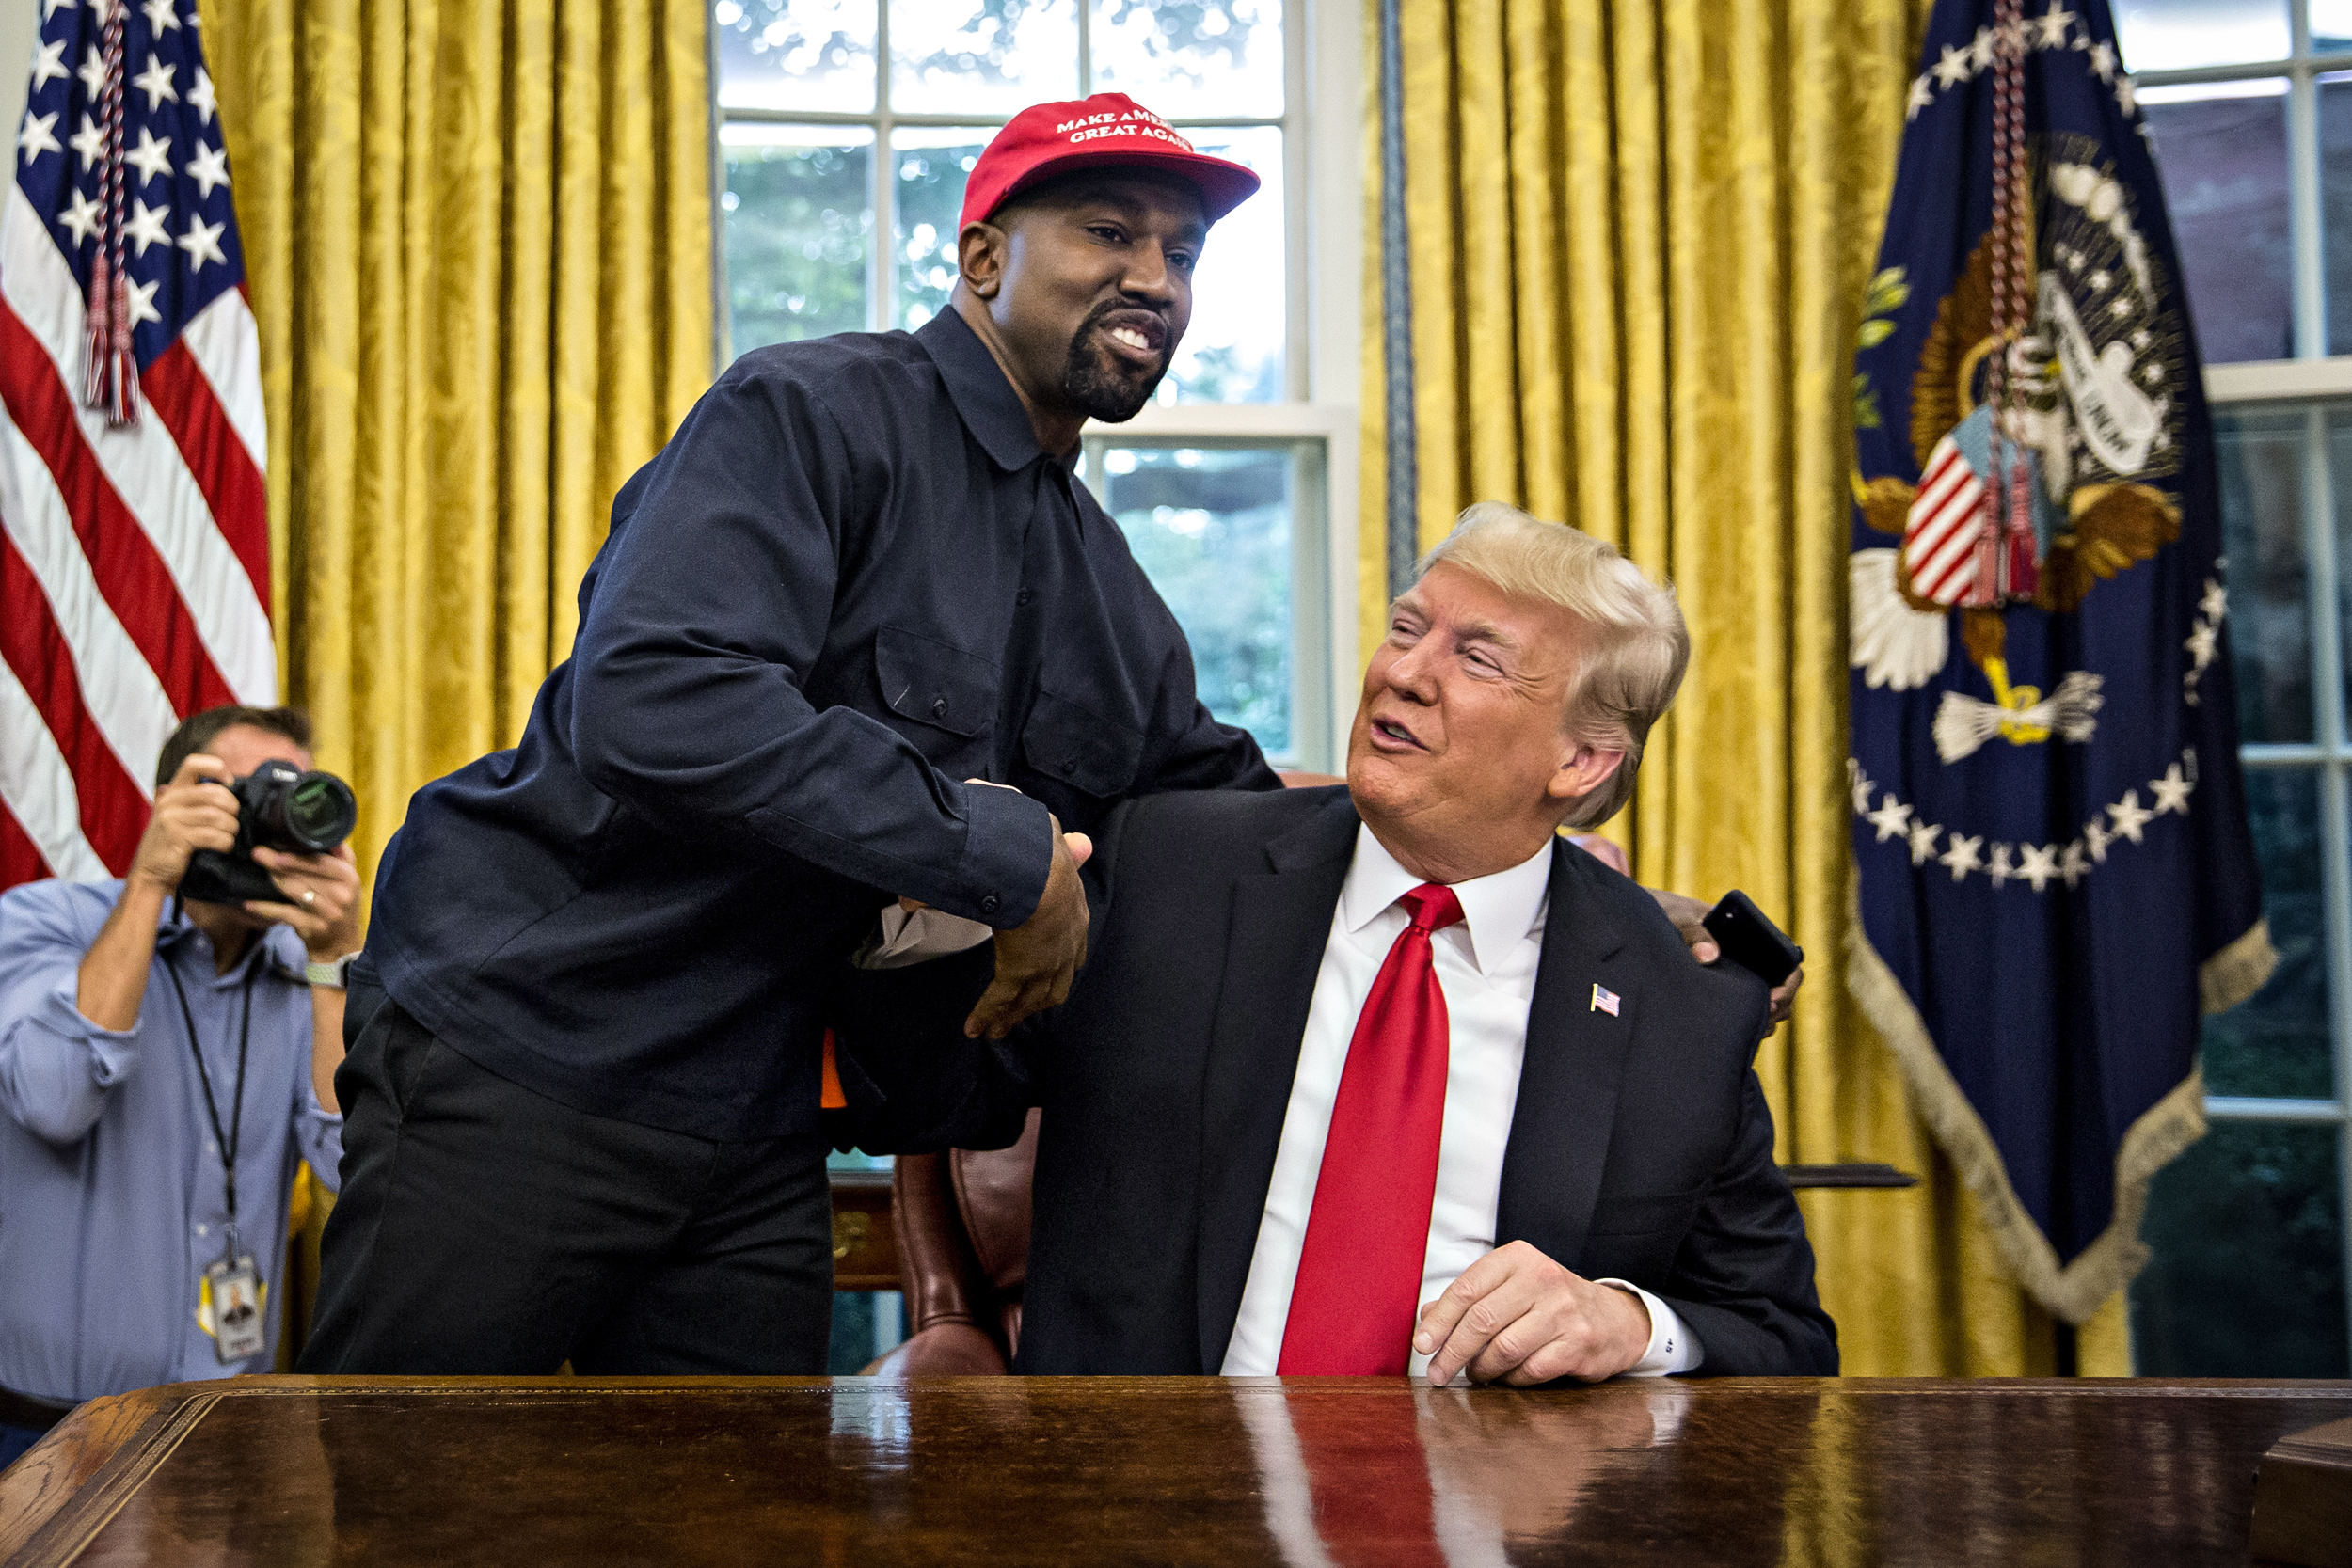 Kanye West Accuses Donald Trump of Insulting His Ex Kim Kardashian